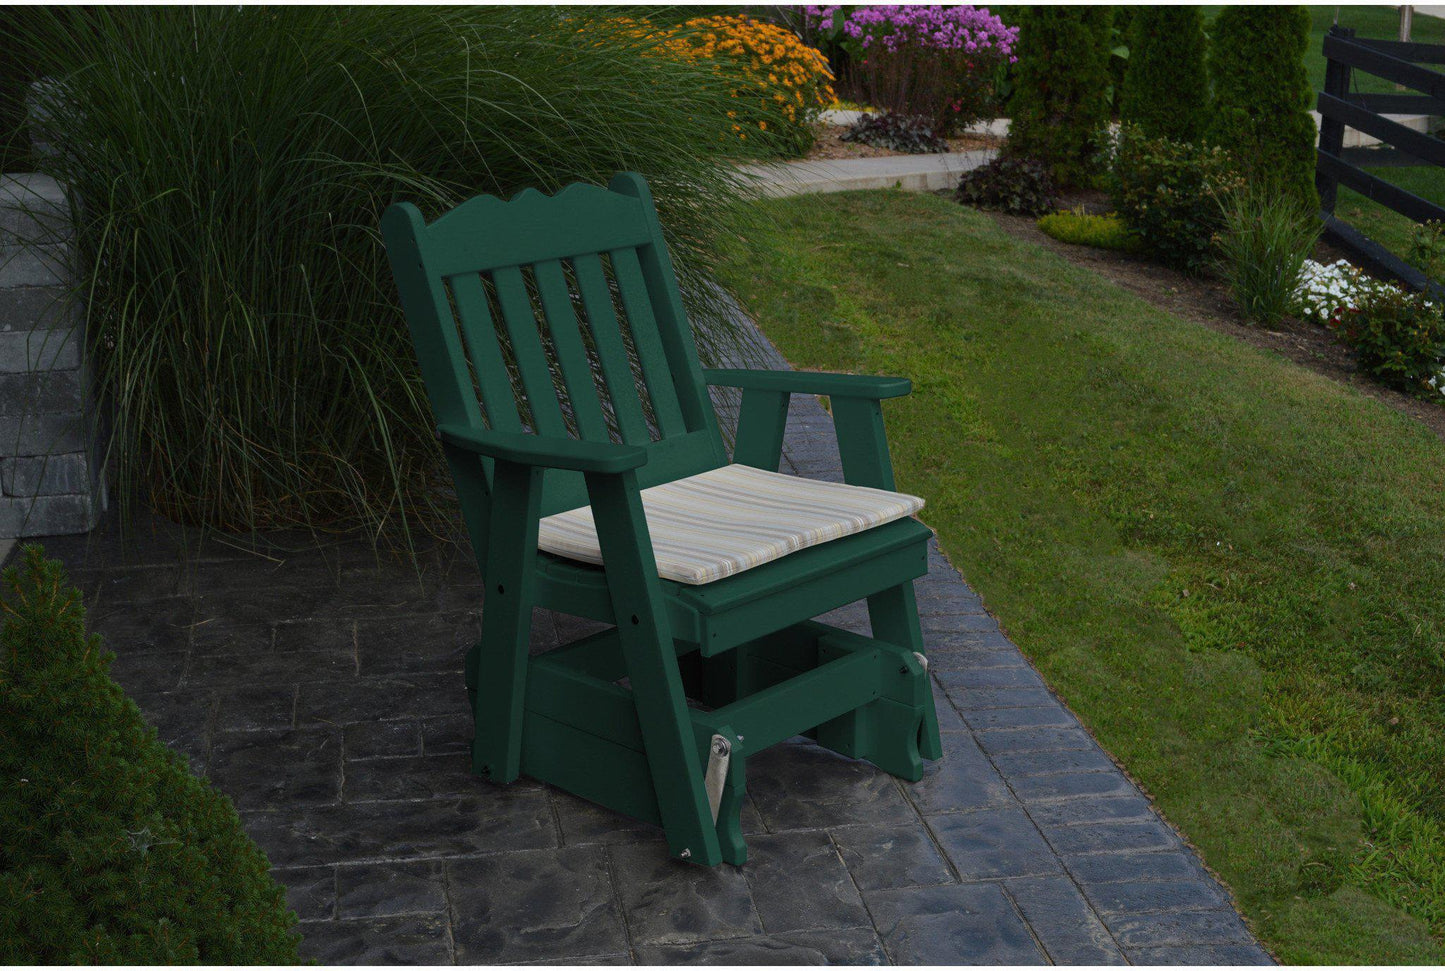 Outdoor Glider - A&L Furniture Company Recycled Plastic Royal English Gliding Chair